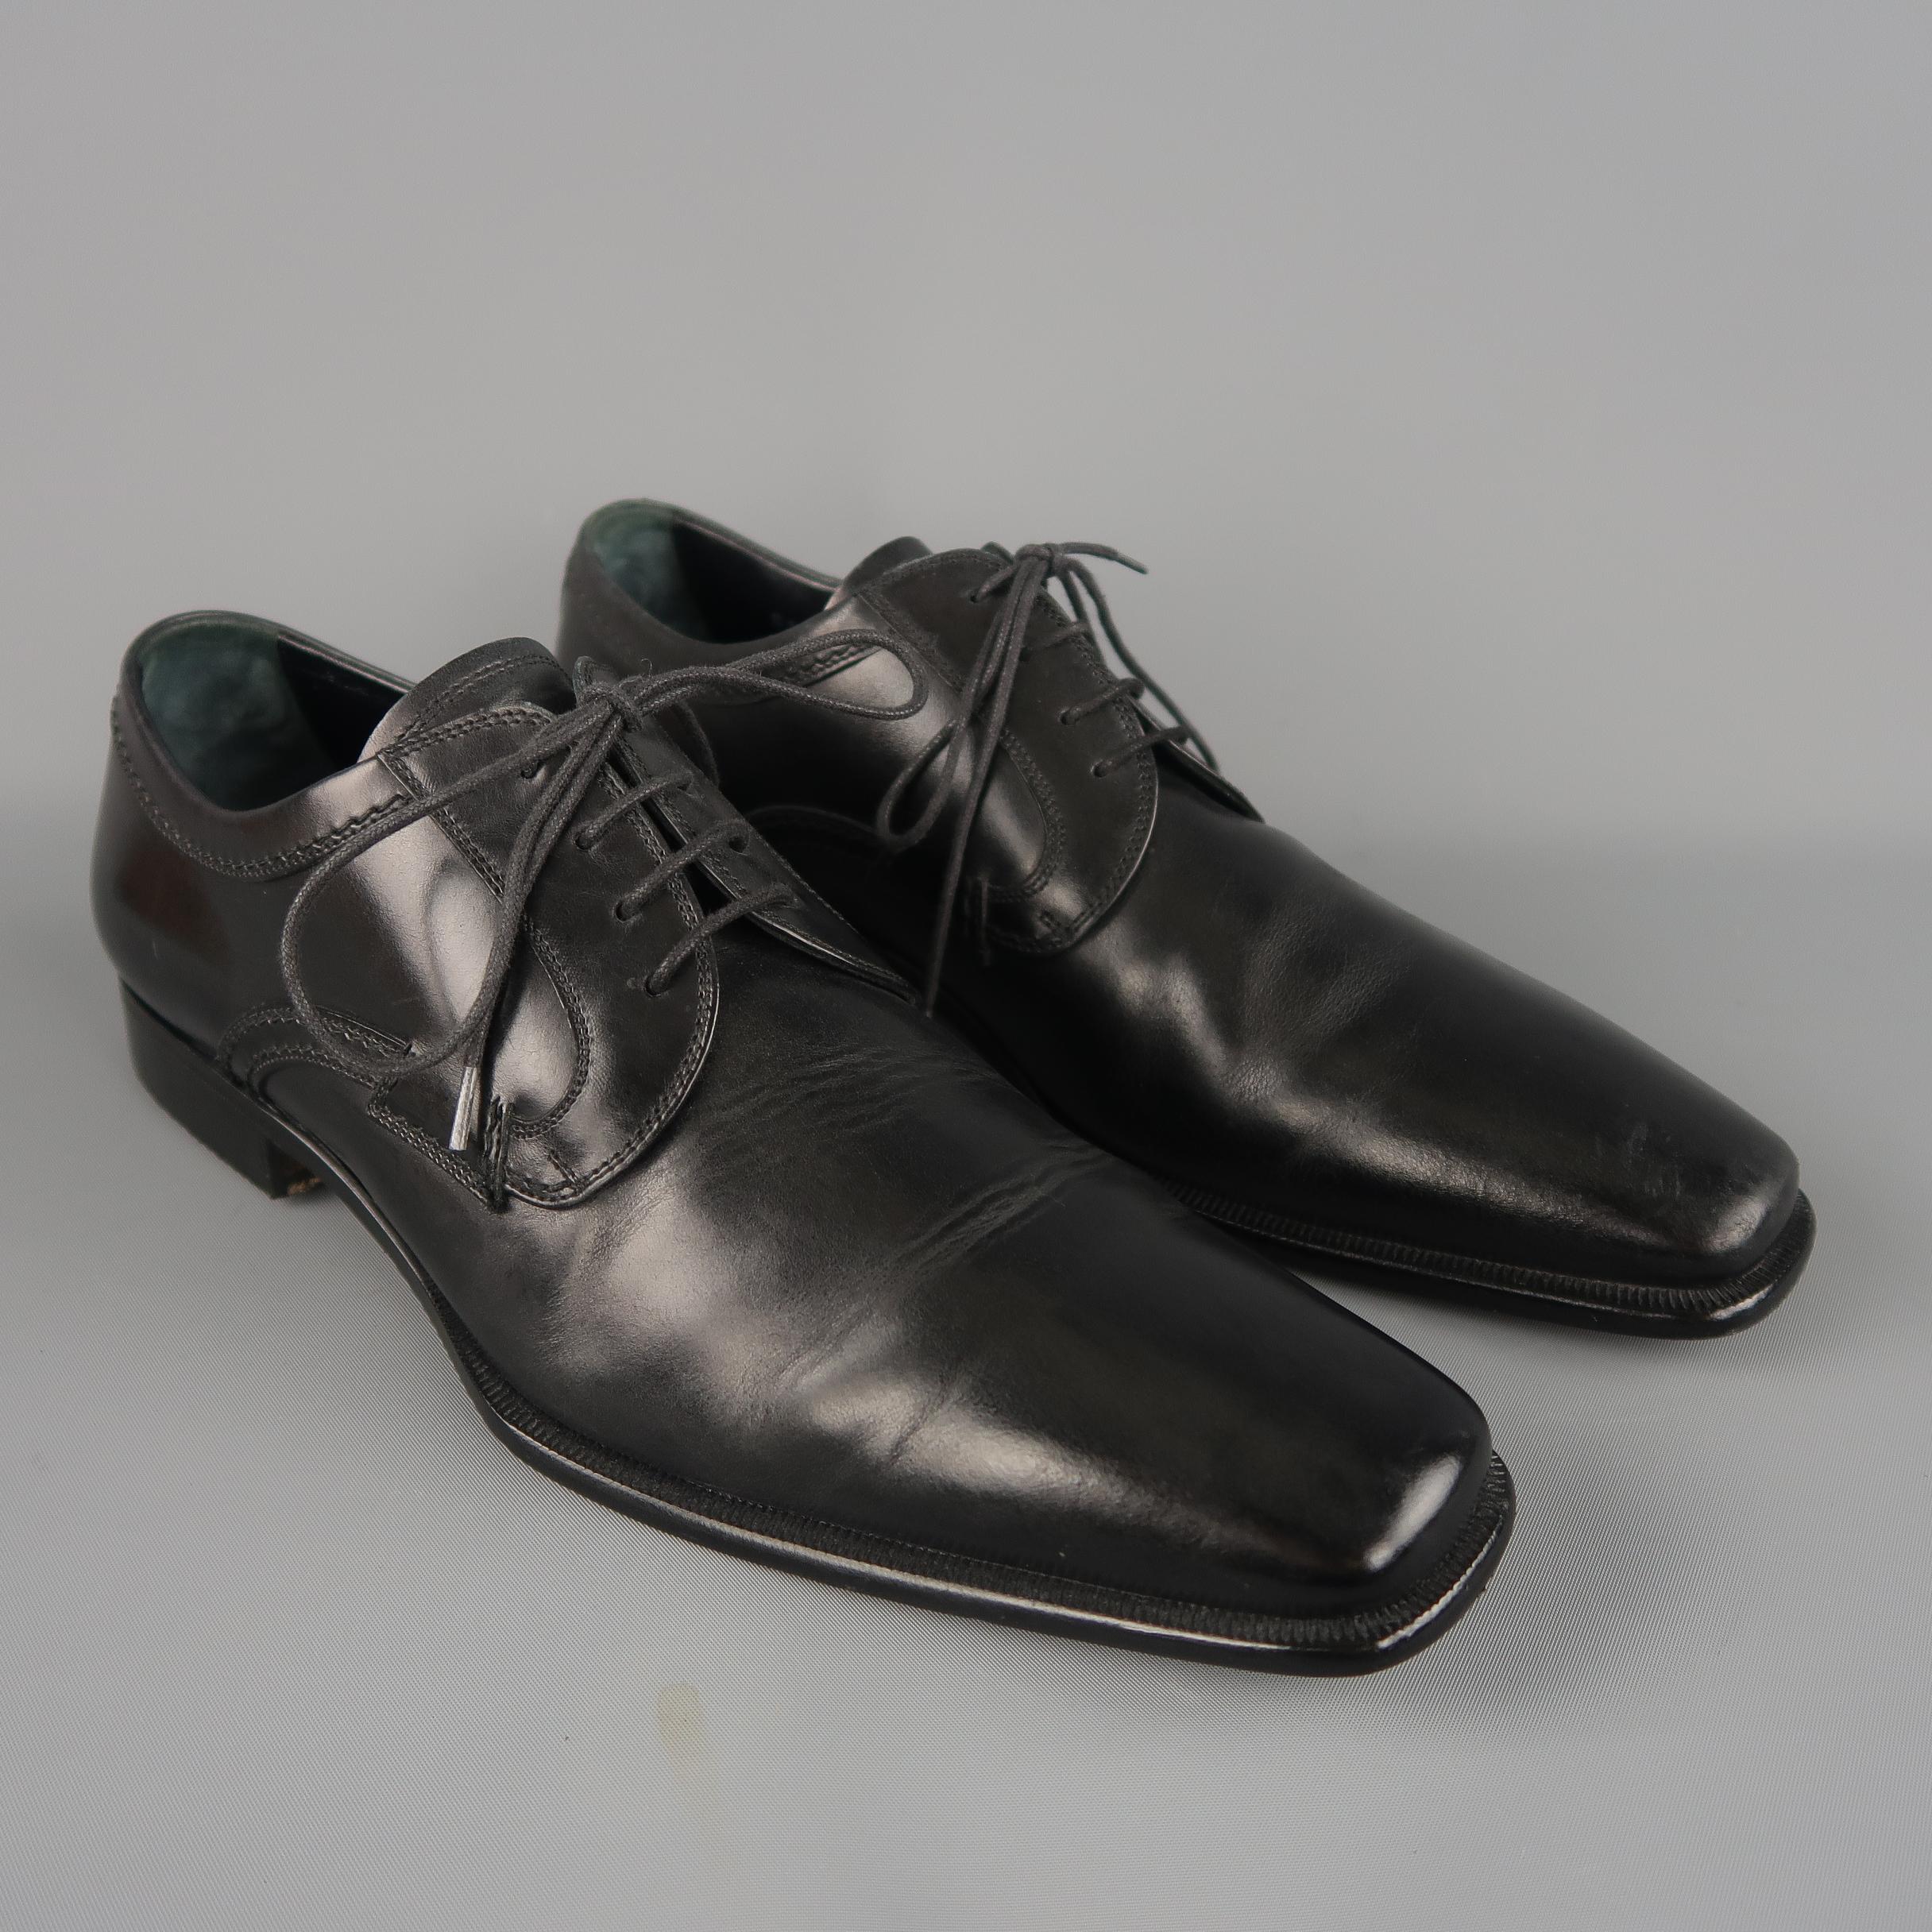 Dolce & Gabbana dress shoes come in black smooth leather with a streamline design and tapered square point toe. Made in Italy.
 
Good Pre-Owned Condition.
Marked: UK 6.5